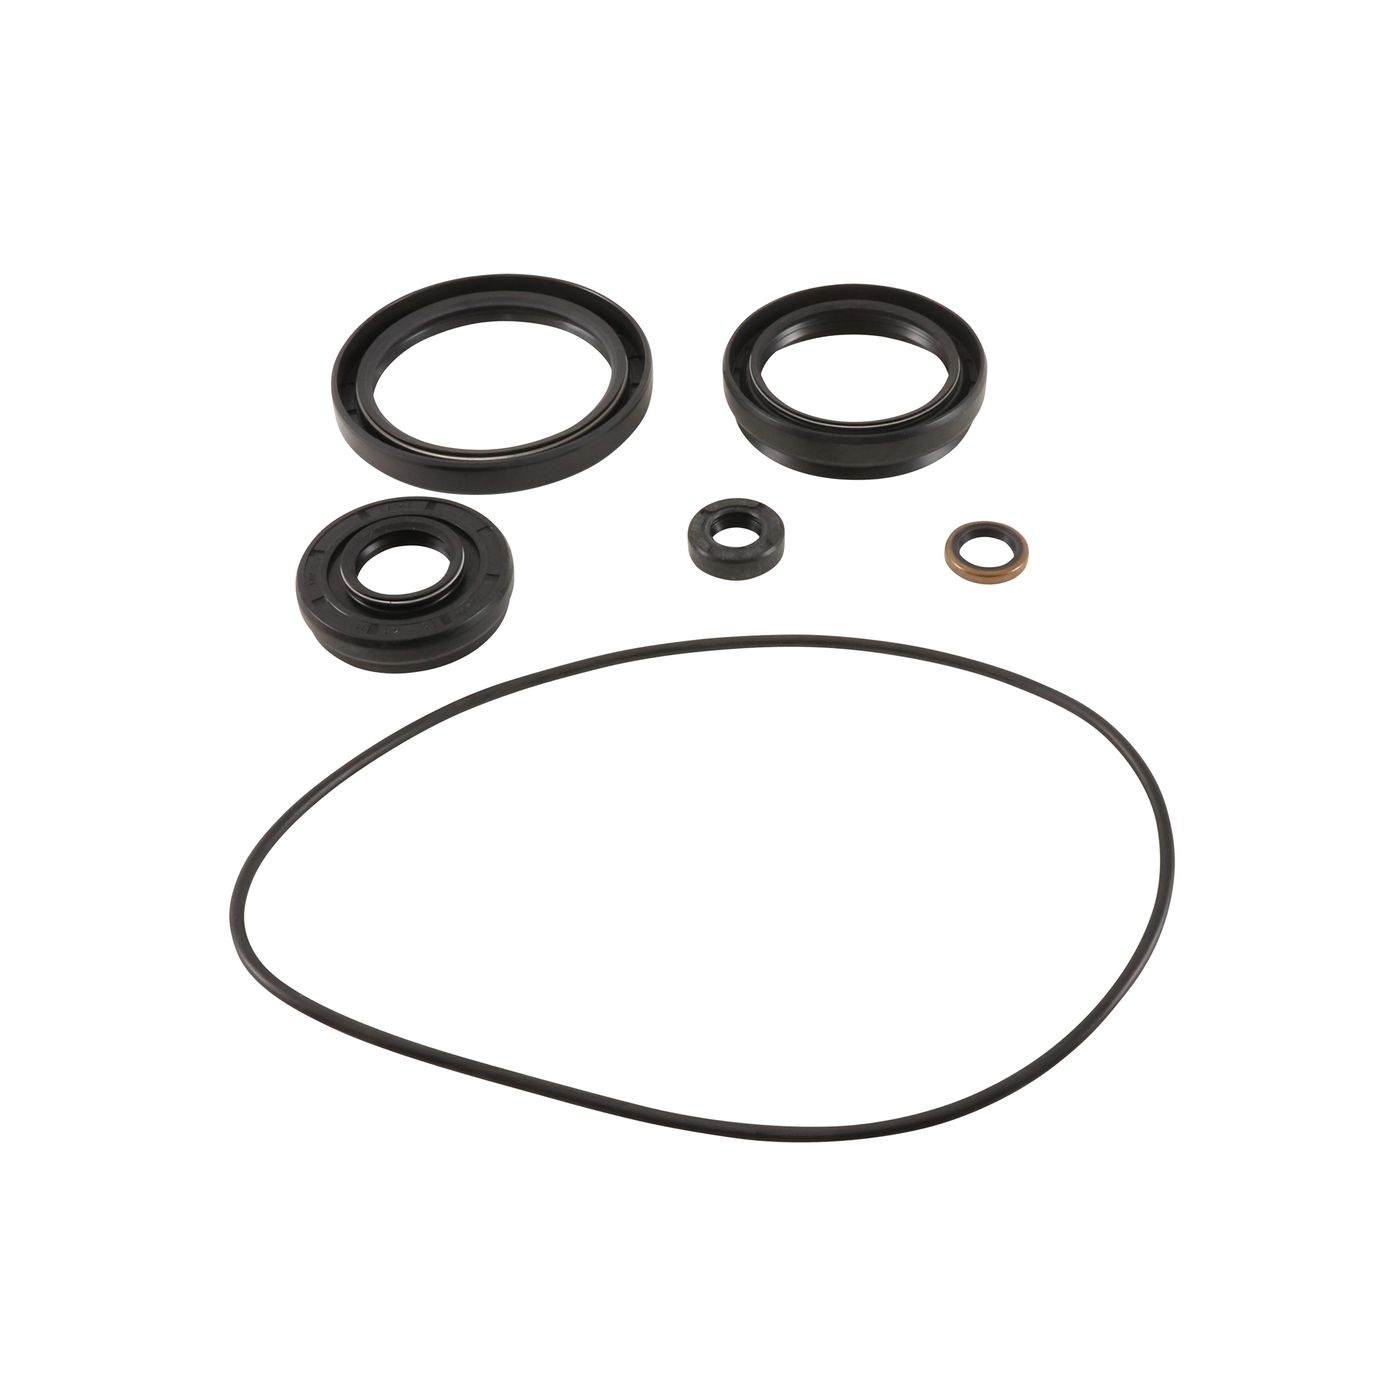 Wrp Diff Seal Kits - WRP252120-5 image